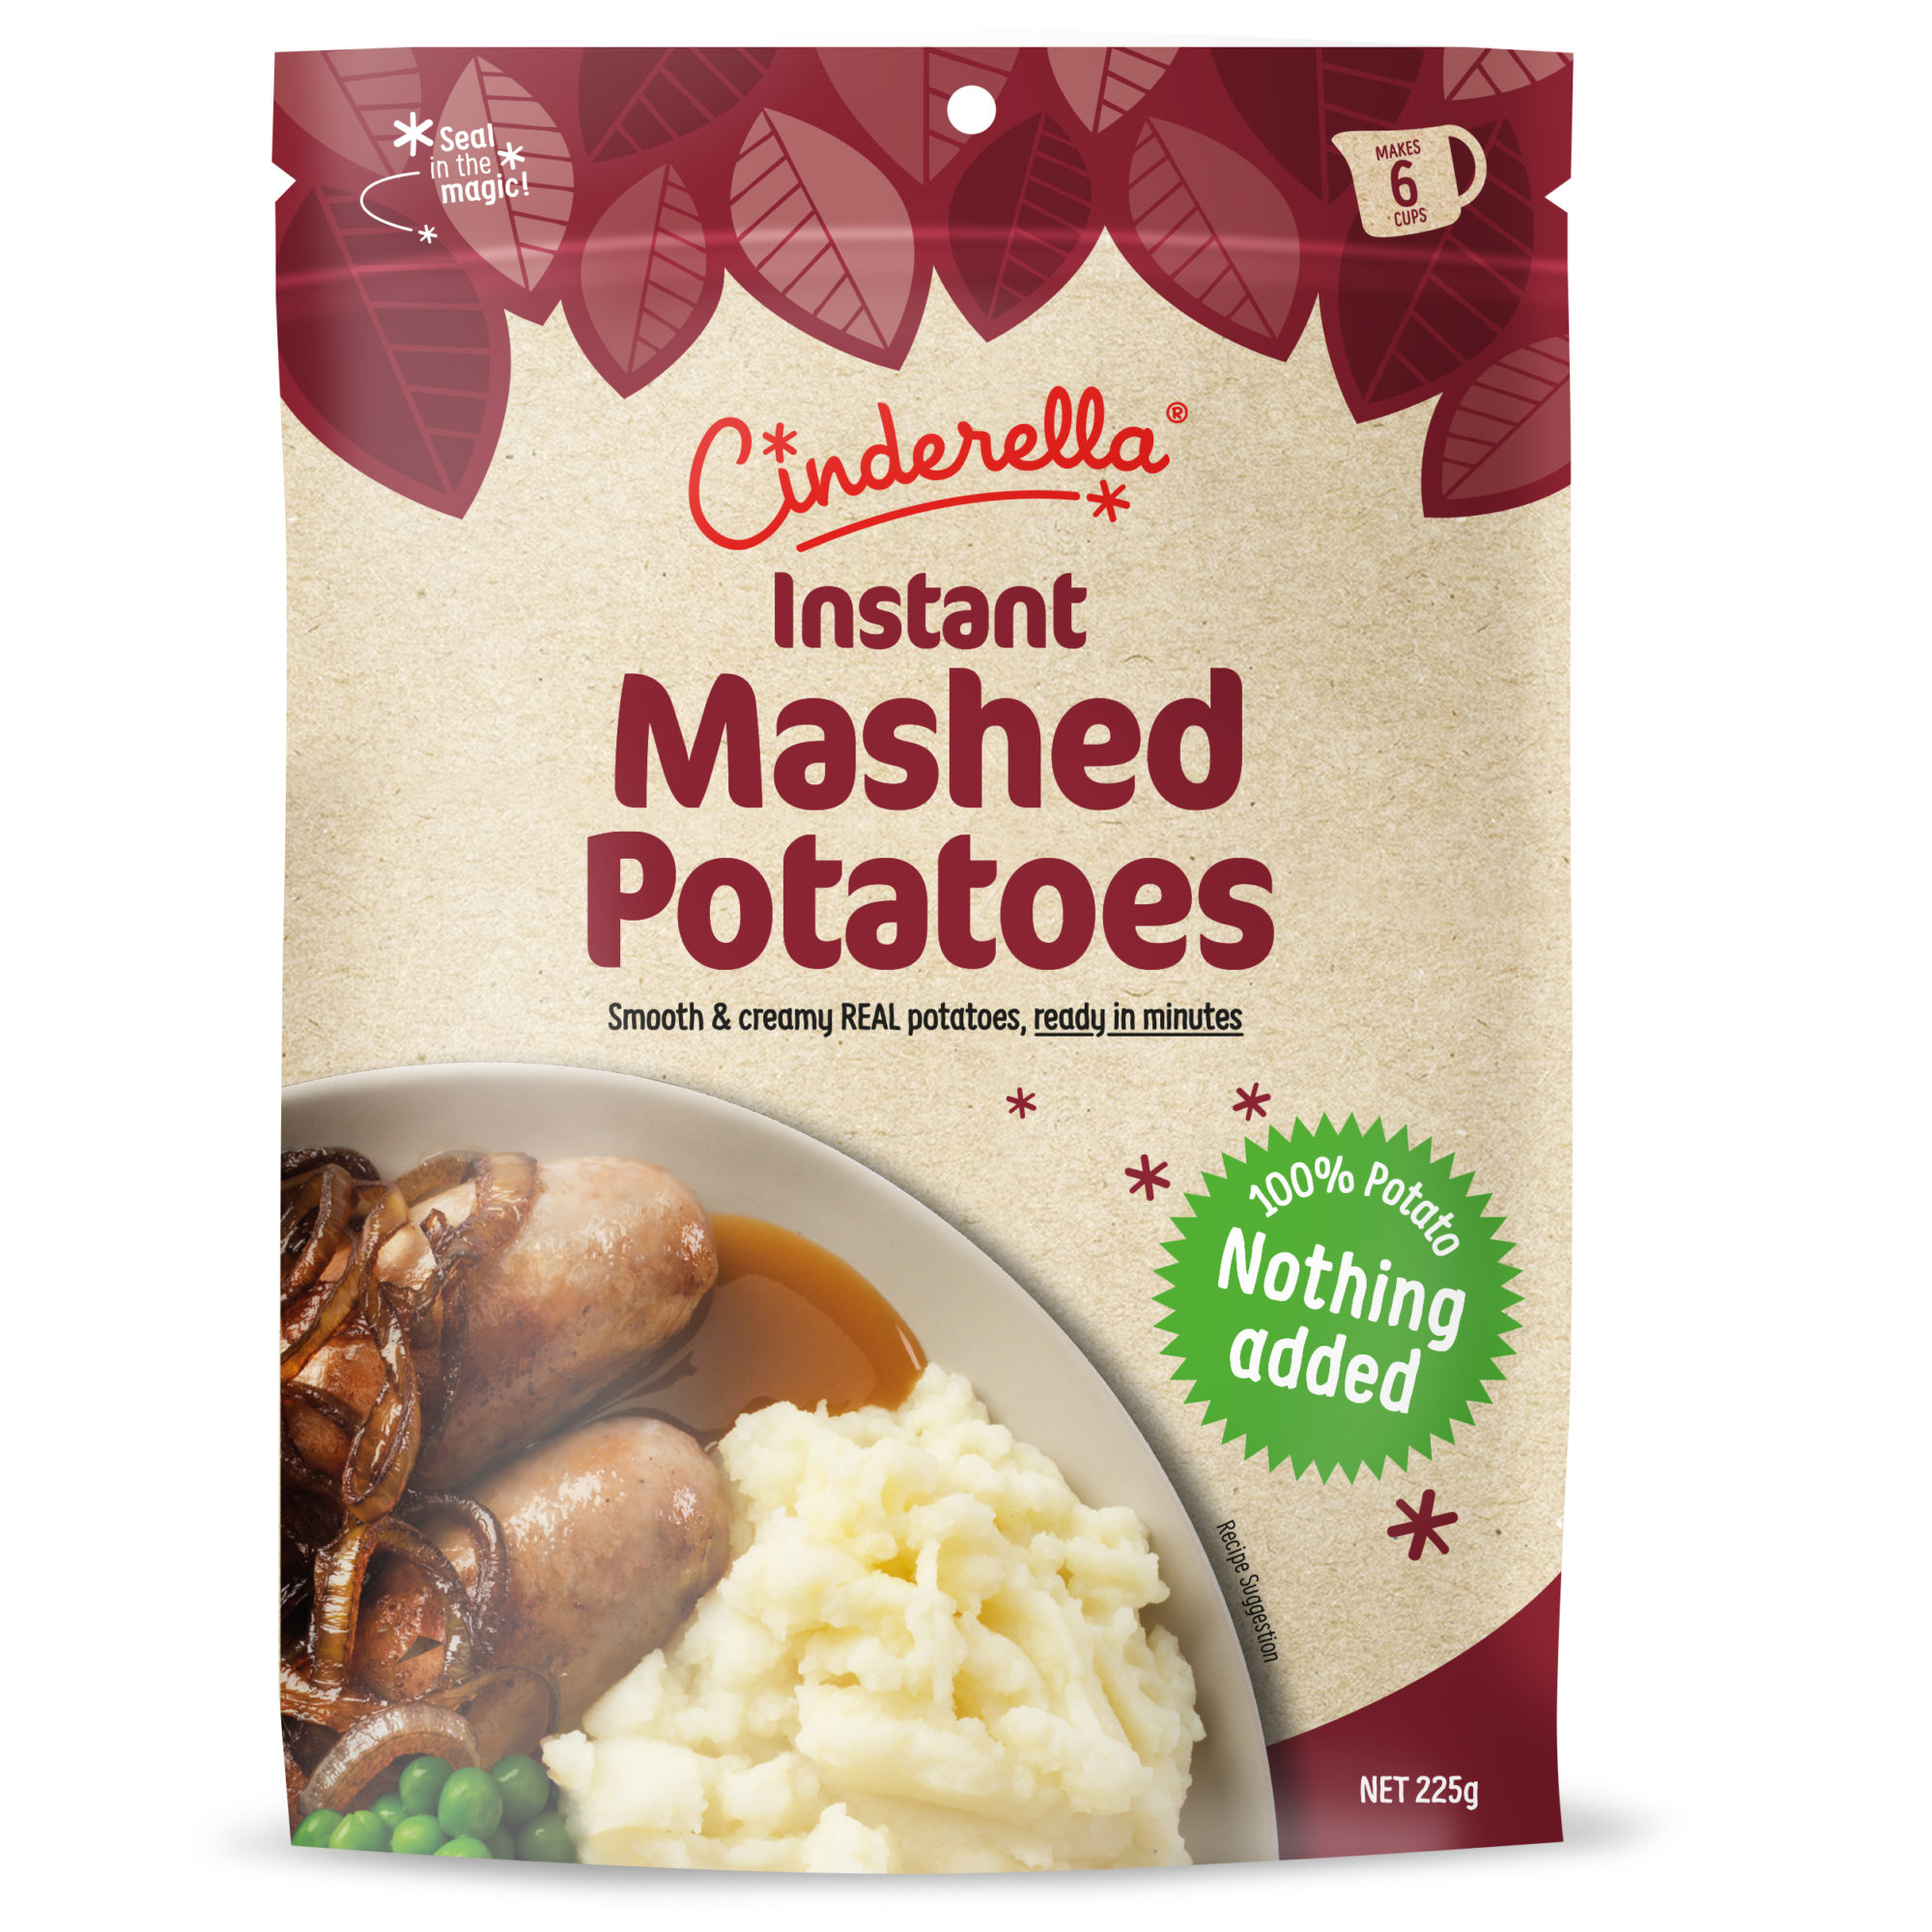 For keeping, the best regular instant potato choice after the bob's re...